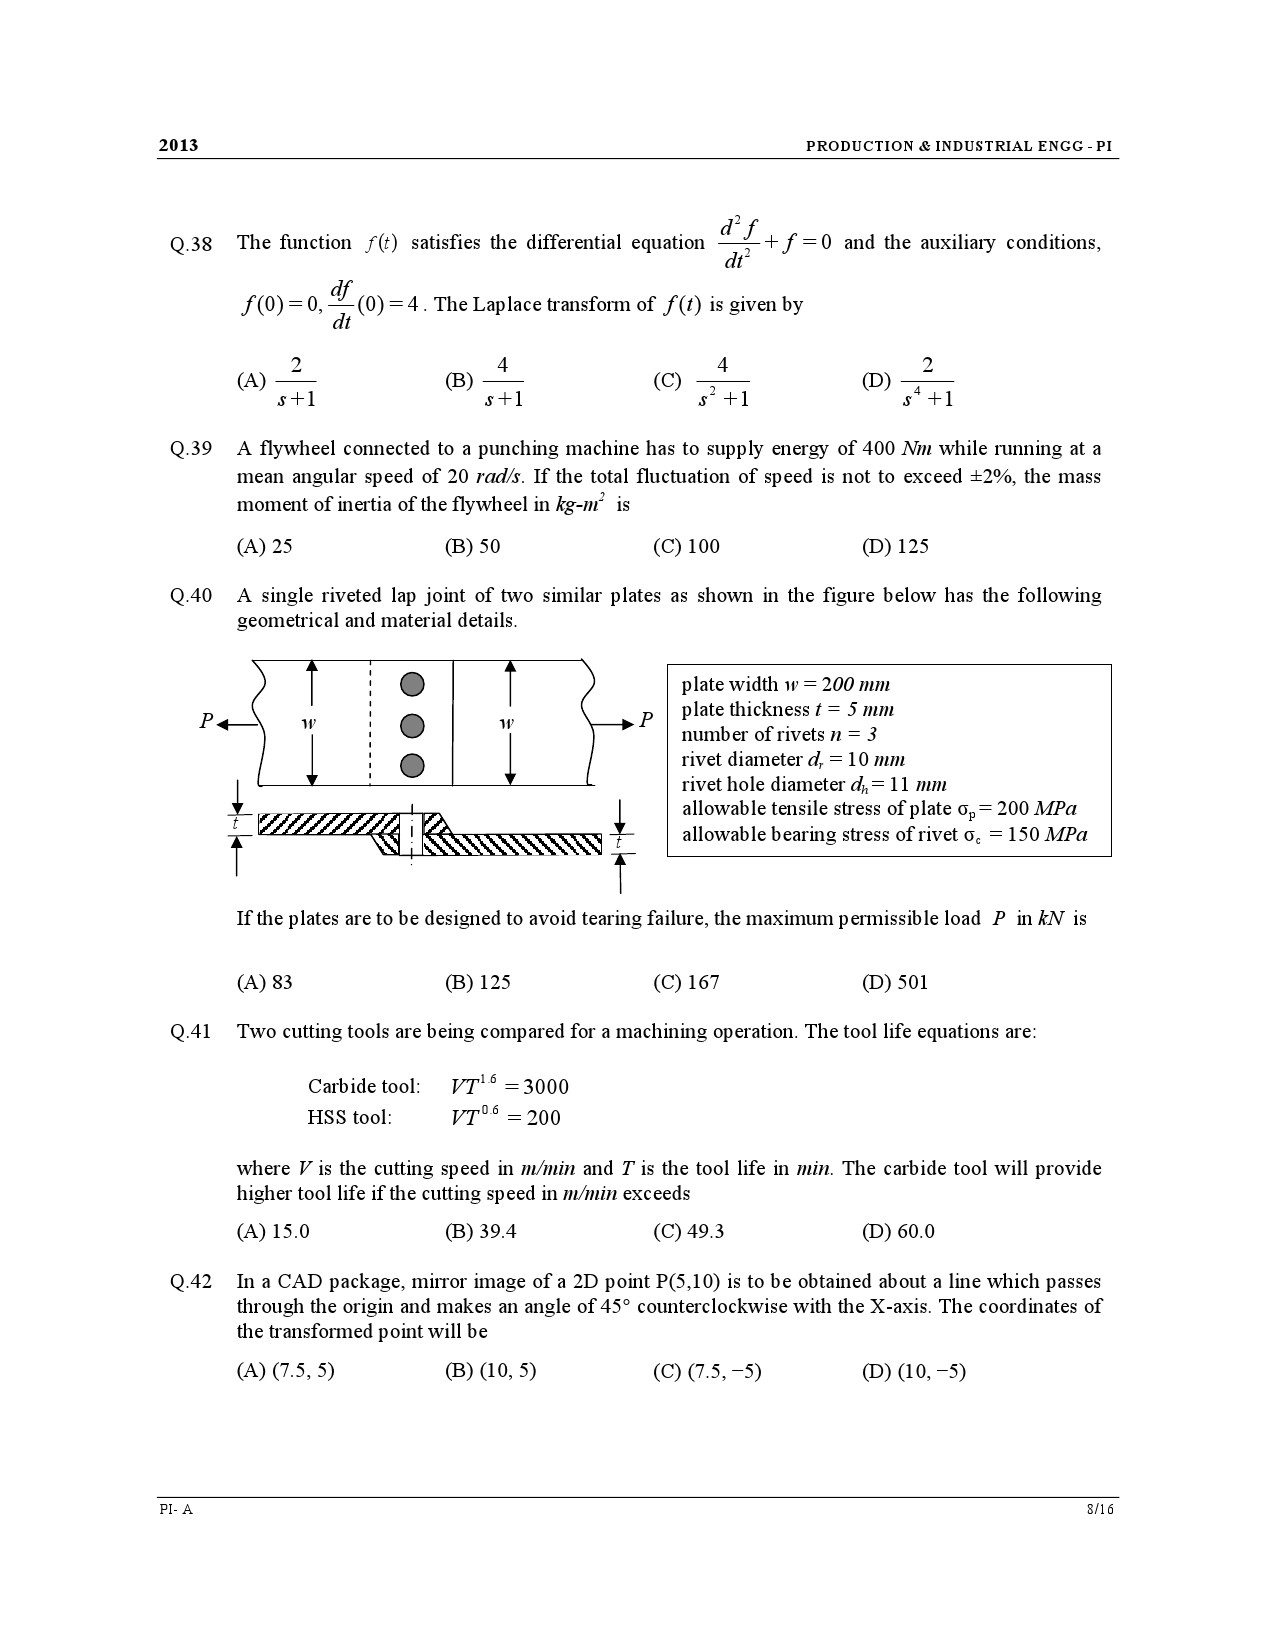 GATE Exam Question Paper 2013 Production and Industrial Engineering 8